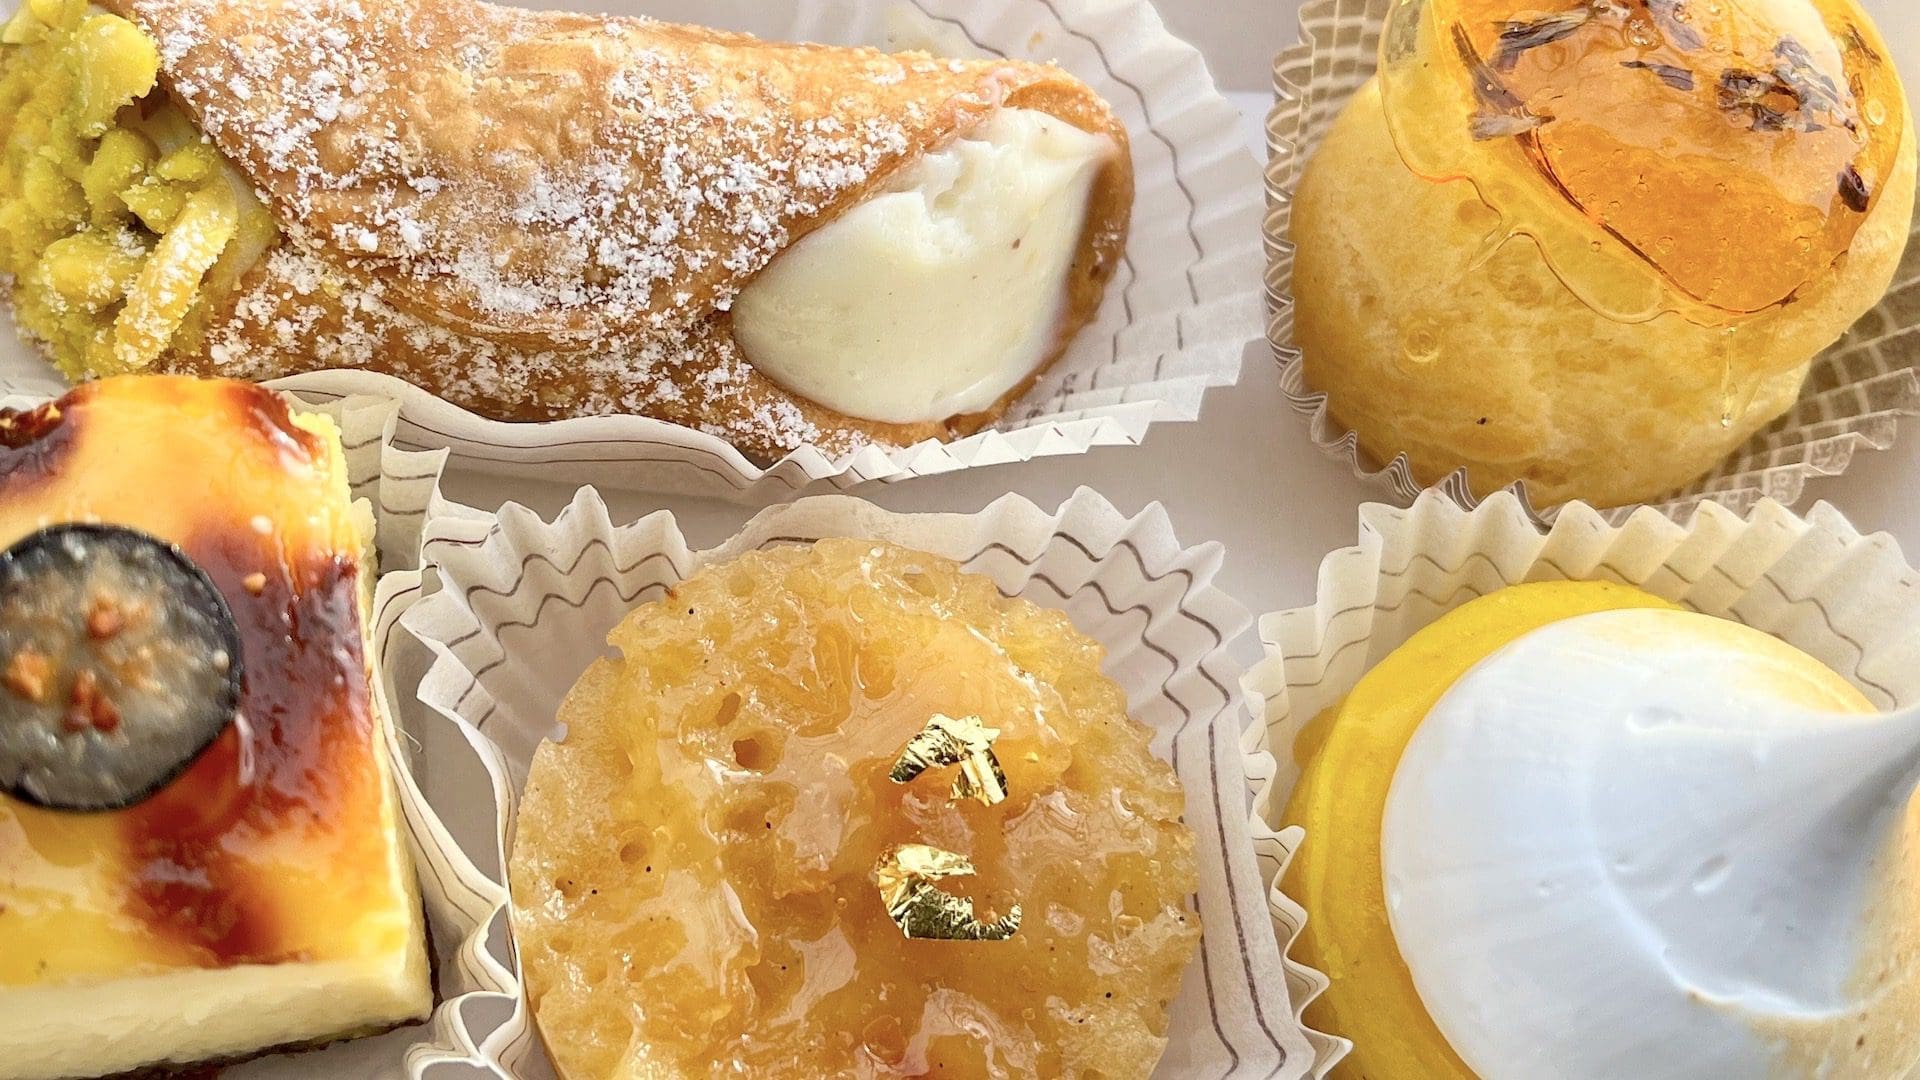 Beautiful miniature Italian pastries like cheesecake apple pie and more from Walk With Us Tours in Berlin